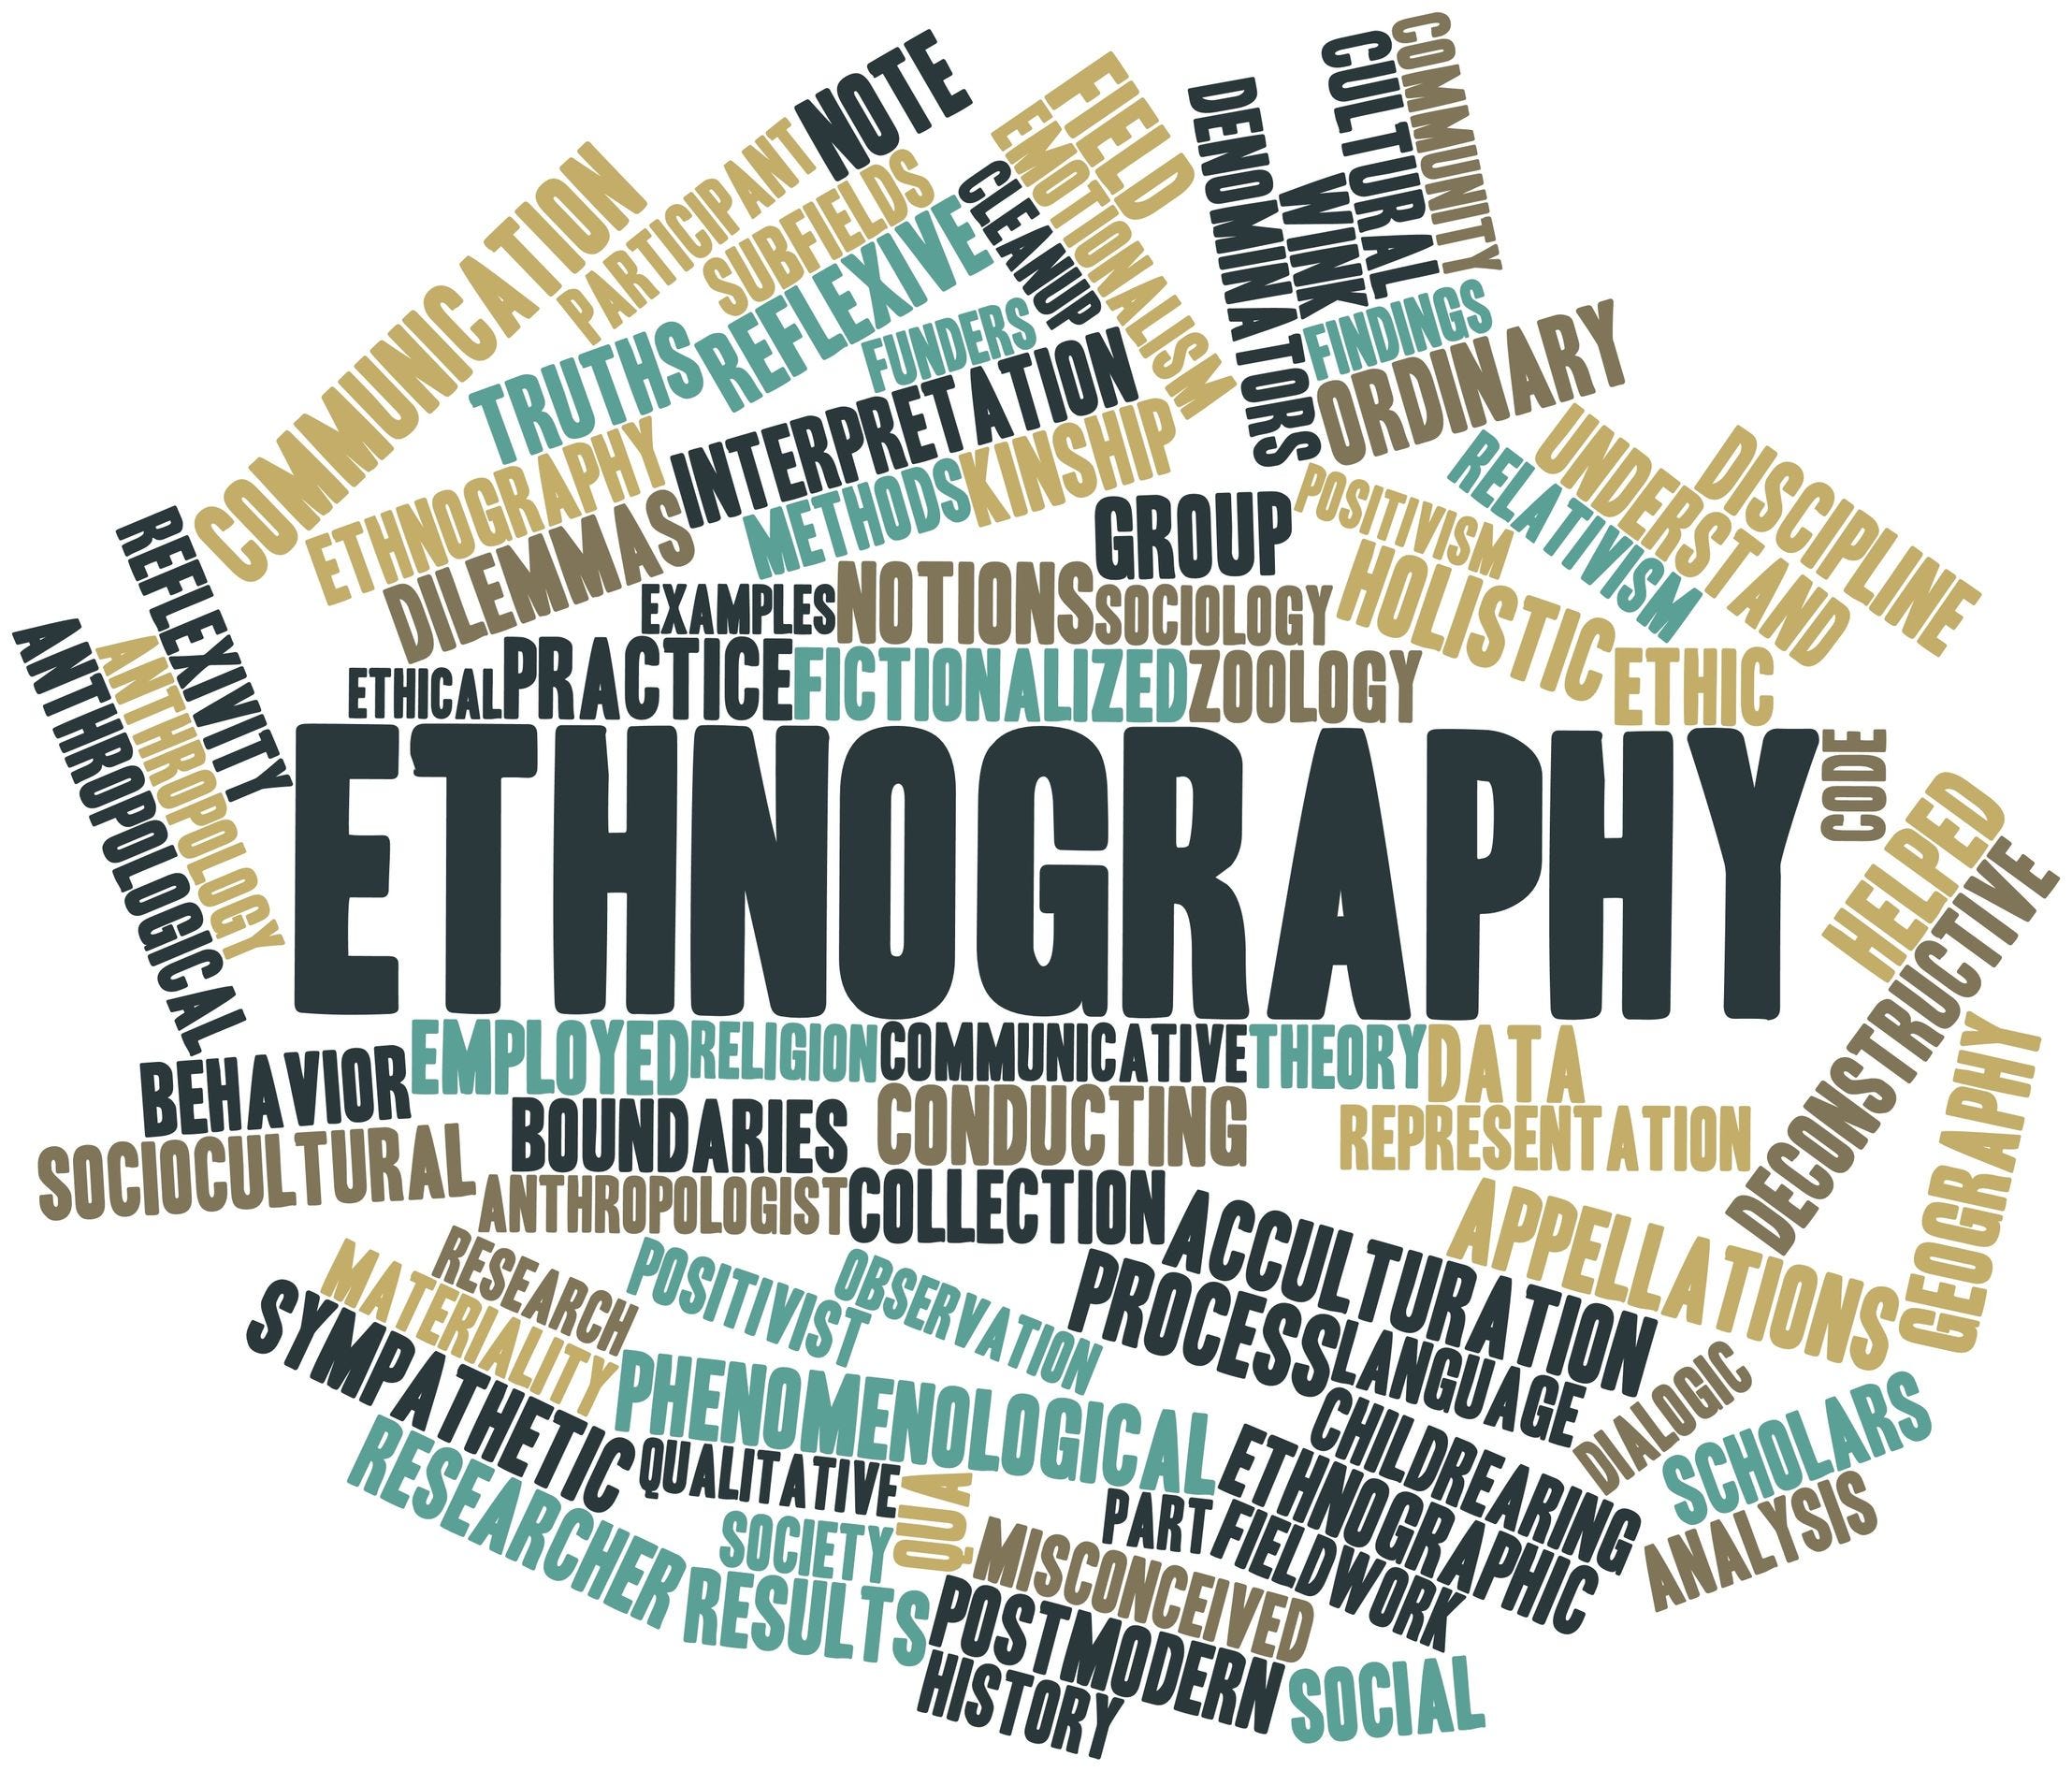 ethnographic research in higher education